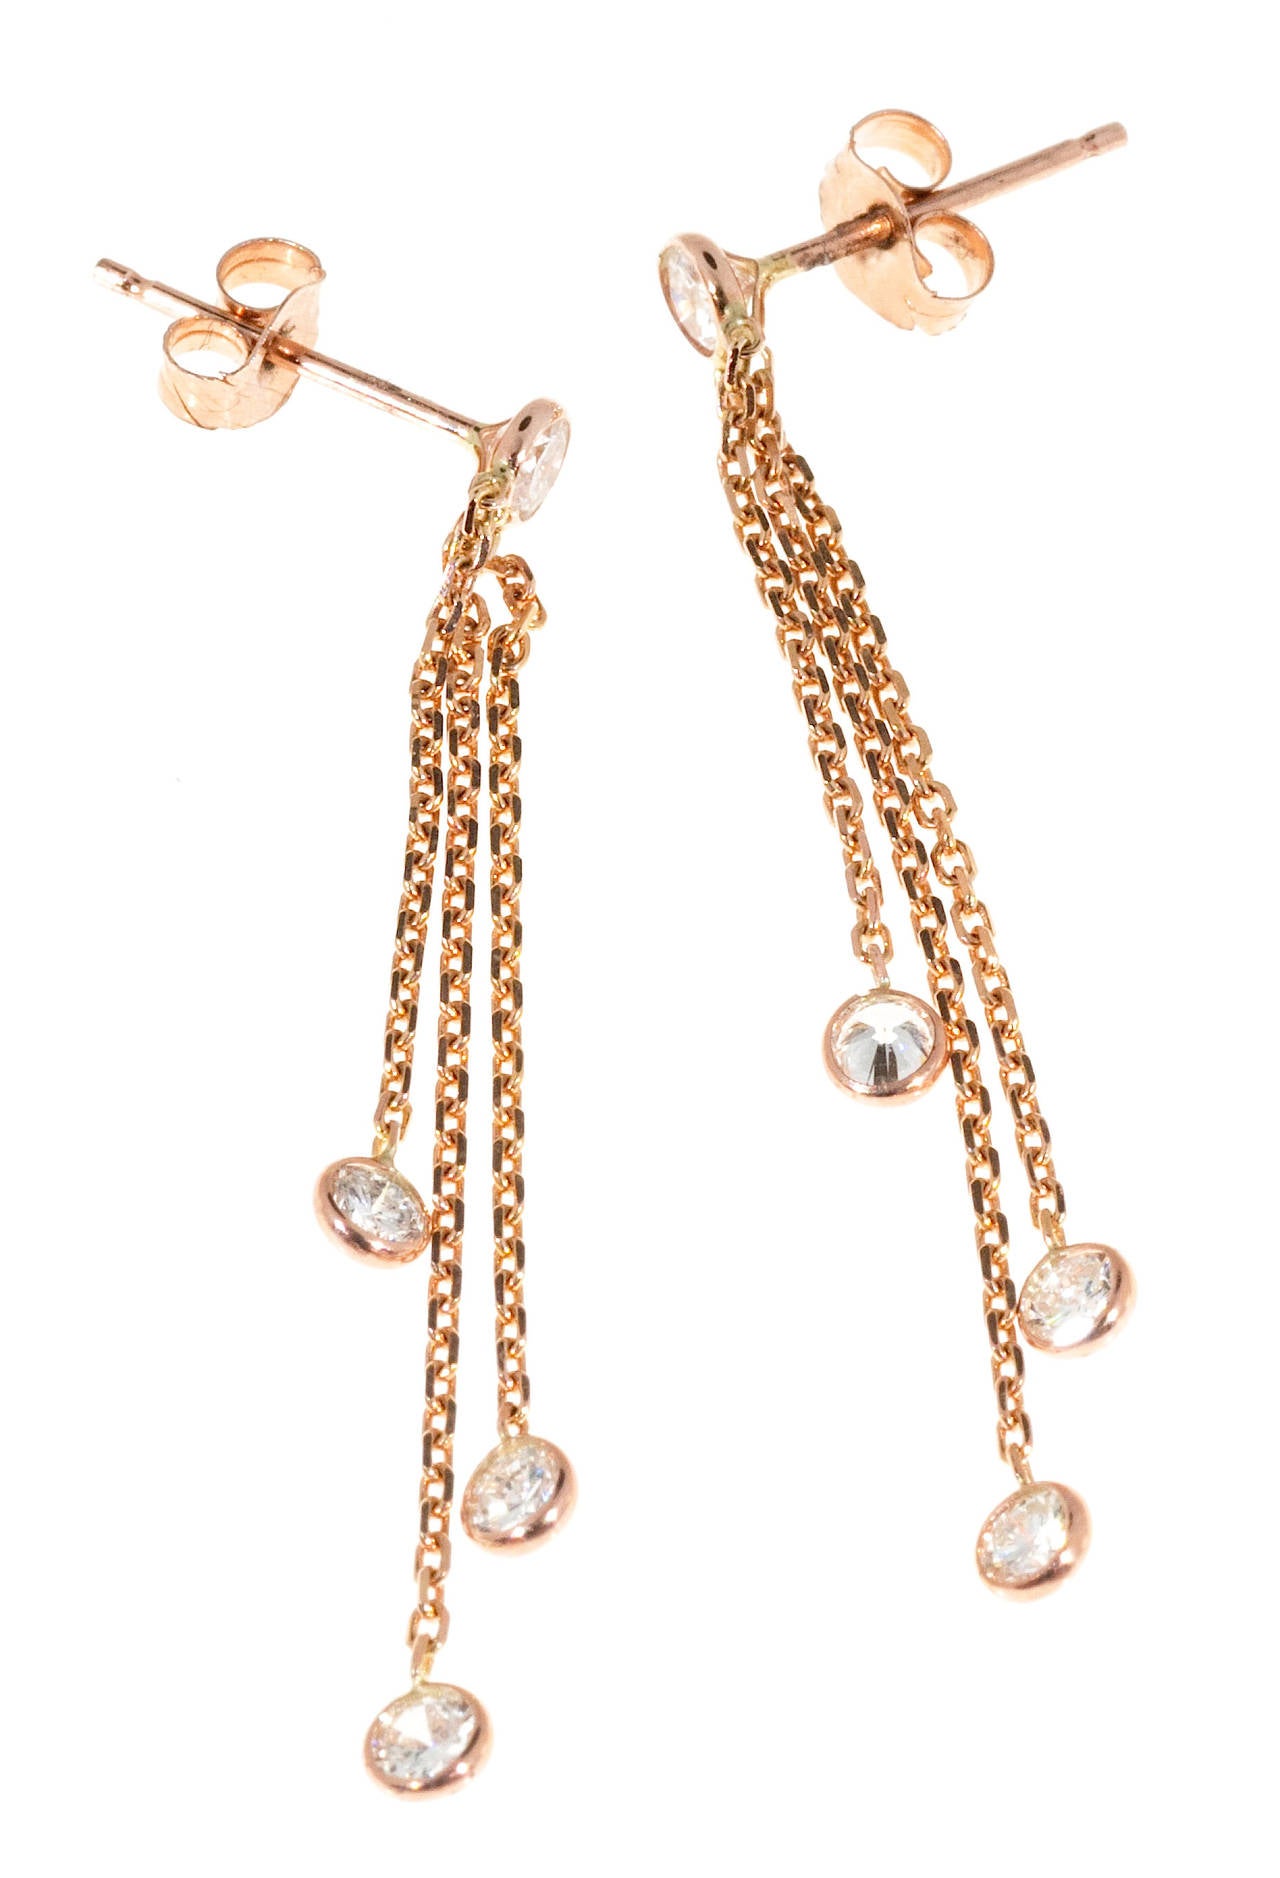 Peter Suchy Diamond by the Yard Style Rose Gold Dangle Drop Earrings In Good Condition For Sale In Stamford, CT